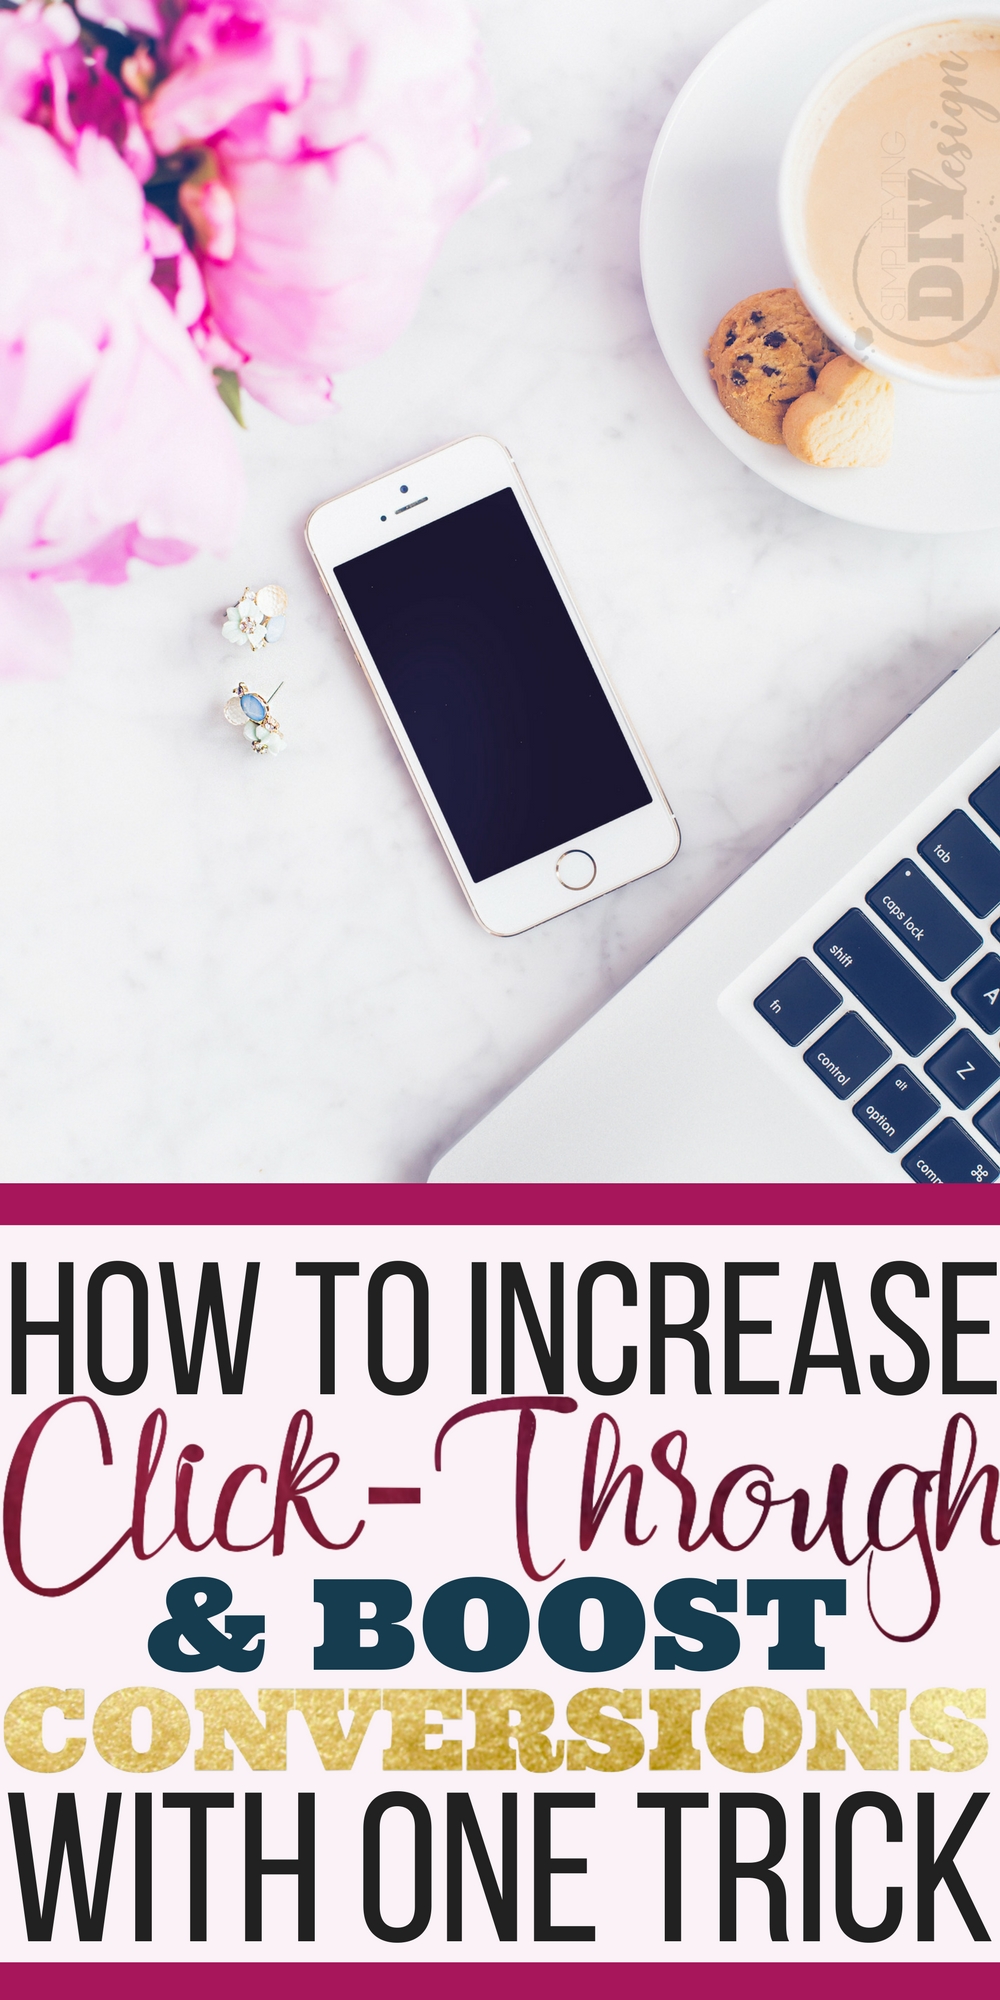 Wow-- not only did this trick help me increase click-through rates but my conversions are through the roof! AND I'm gaining trust and nurturing my list! laziness made me put this off for awhile but now I'll never turn back!